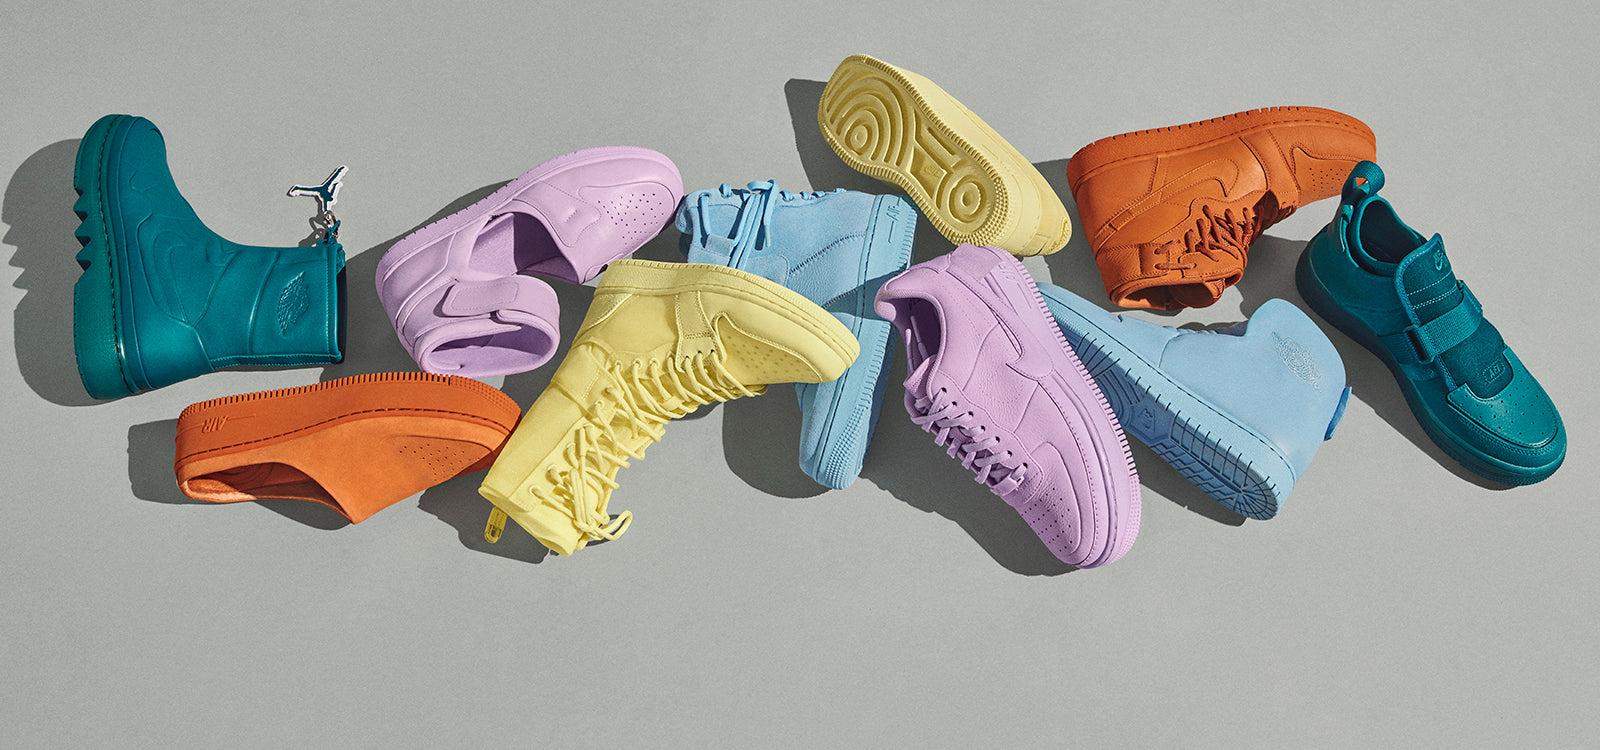 THE 1 REIMAGINED "SPRING COLORS"